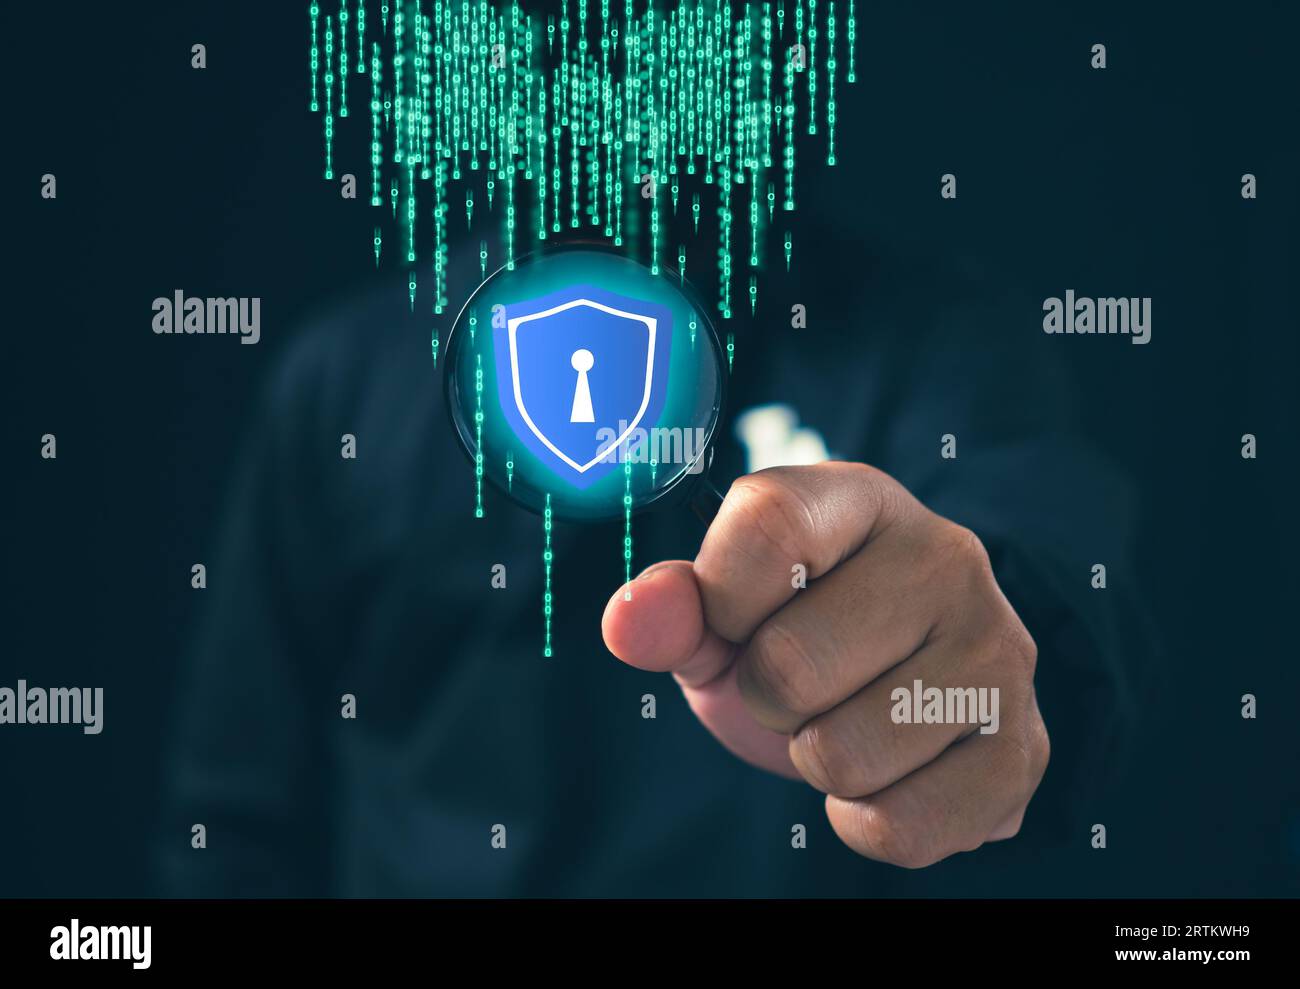 Hacker standing holding a magnifying glass with data protection sign on dark background. Concept of information security in internet networks and espi Stock Photo